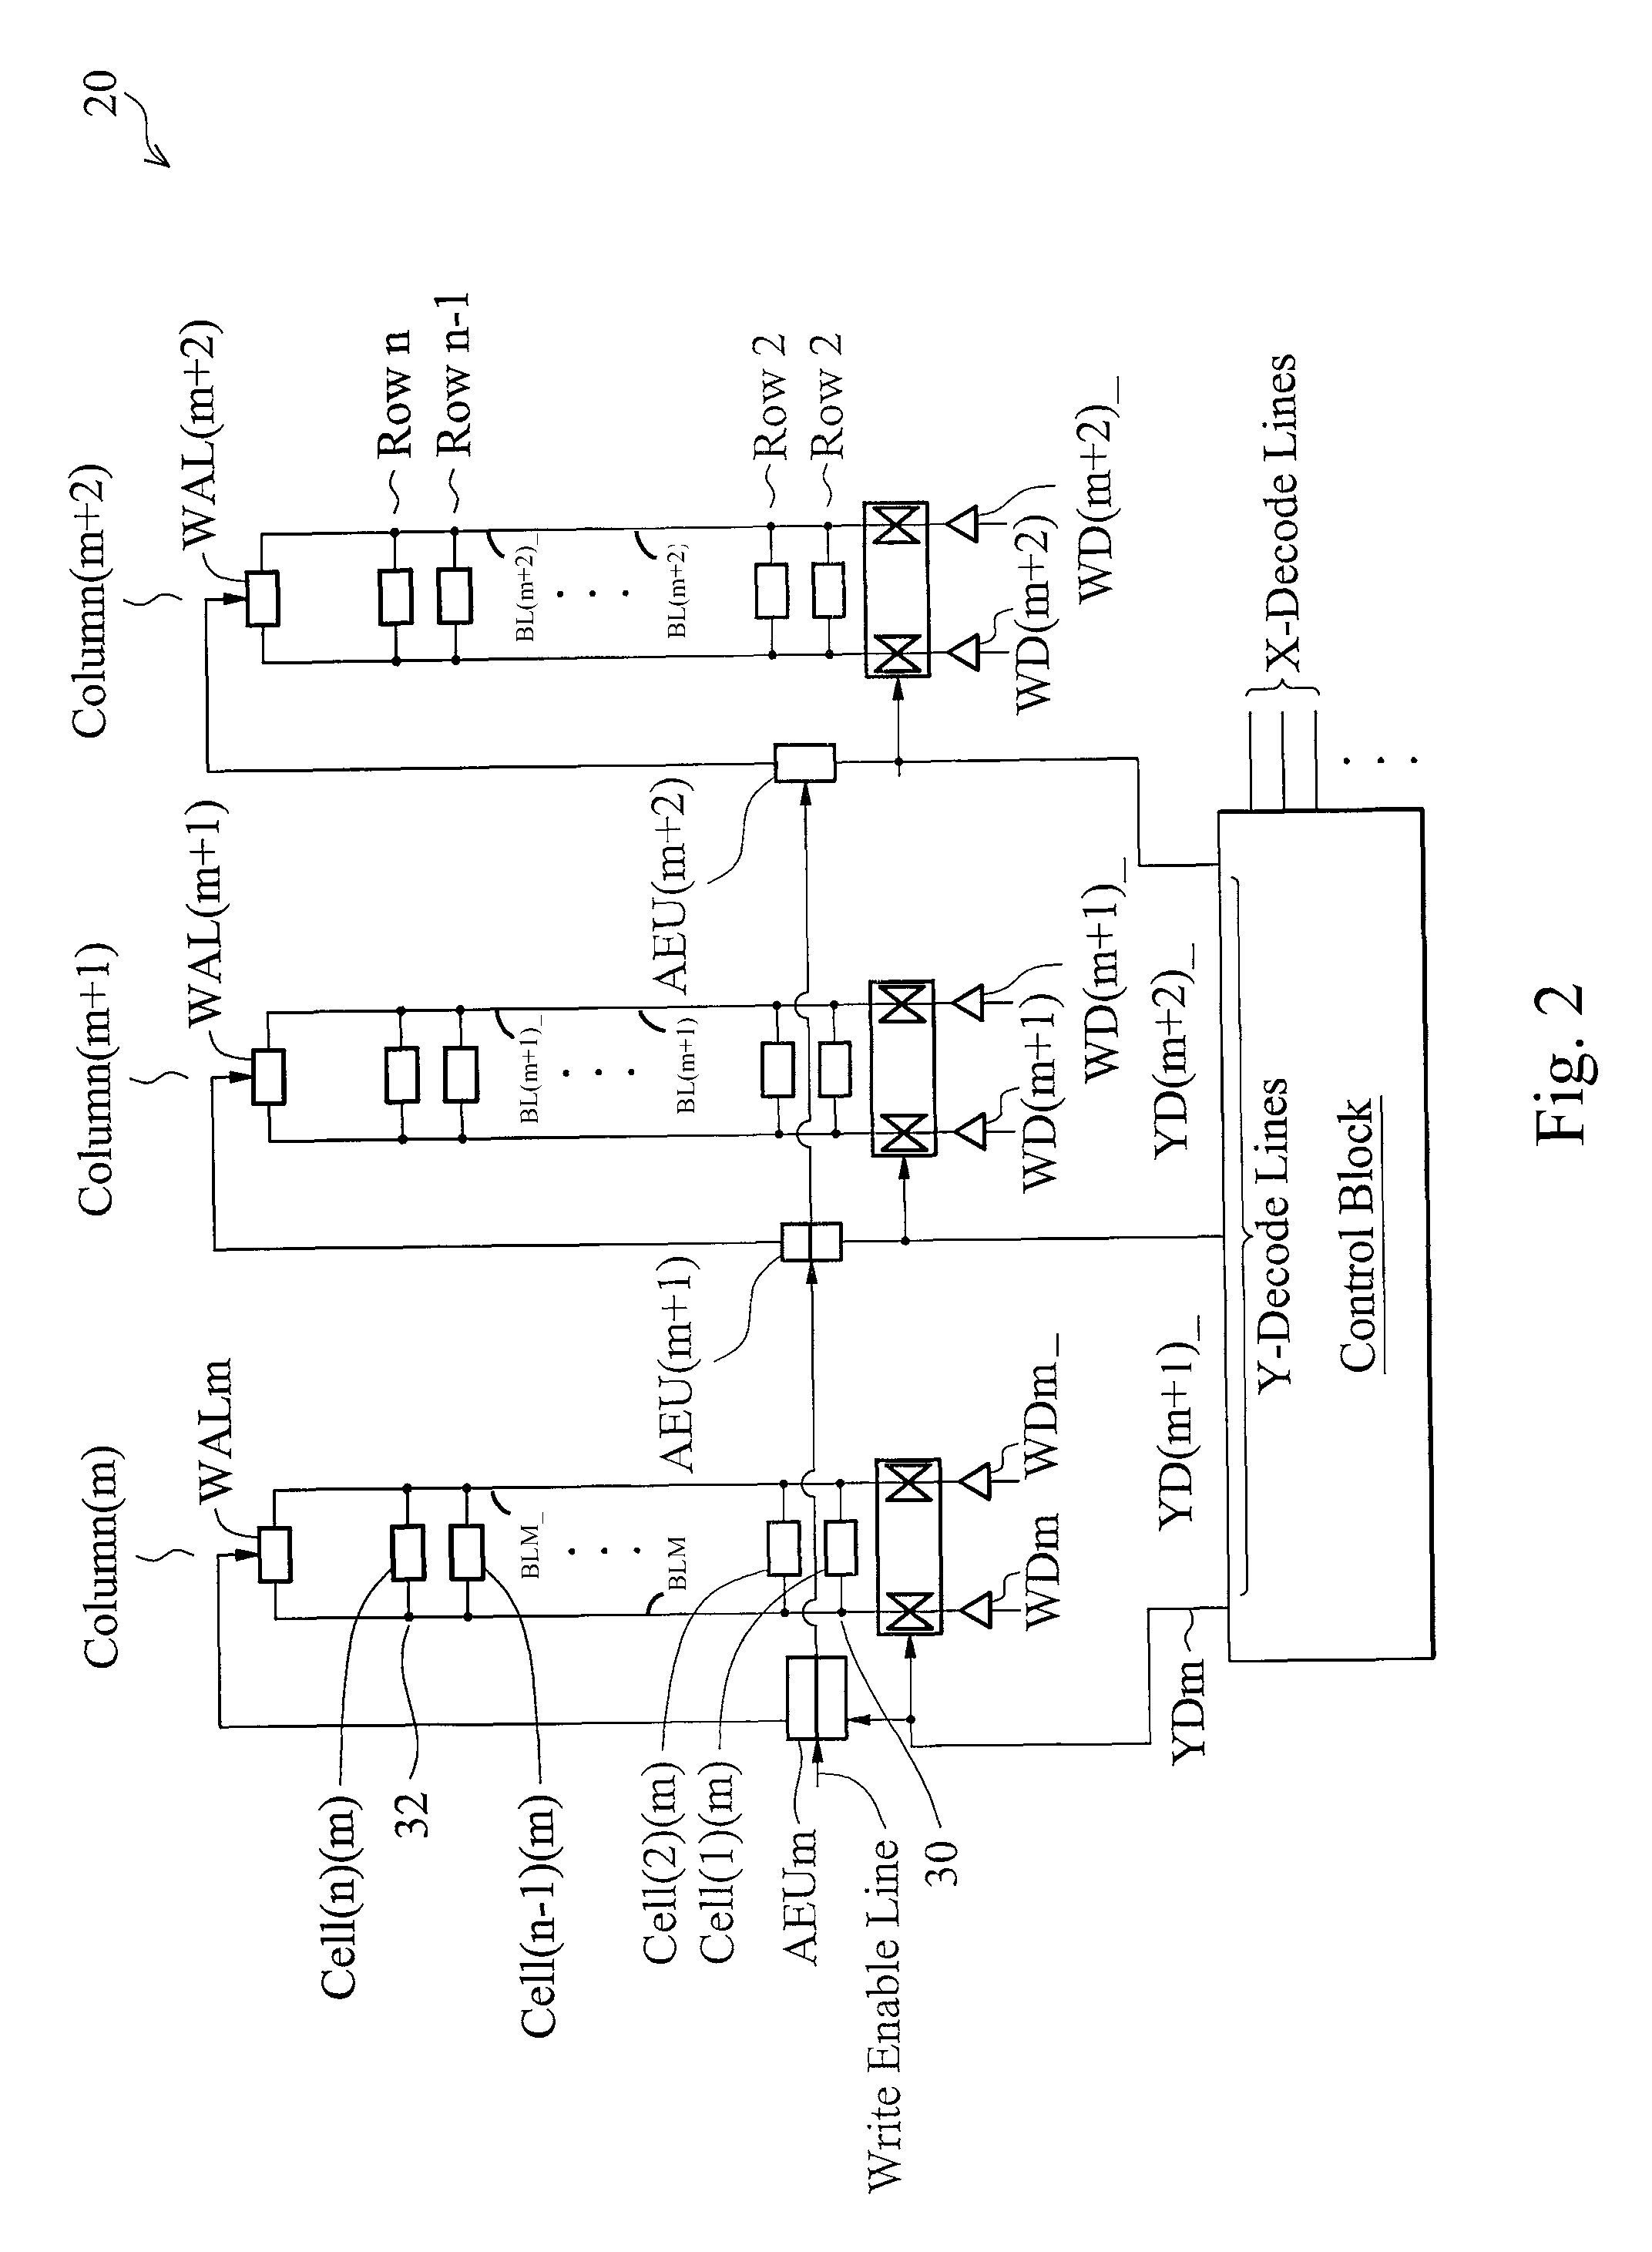 Write assist circuit for improving write margins of SRAM cells